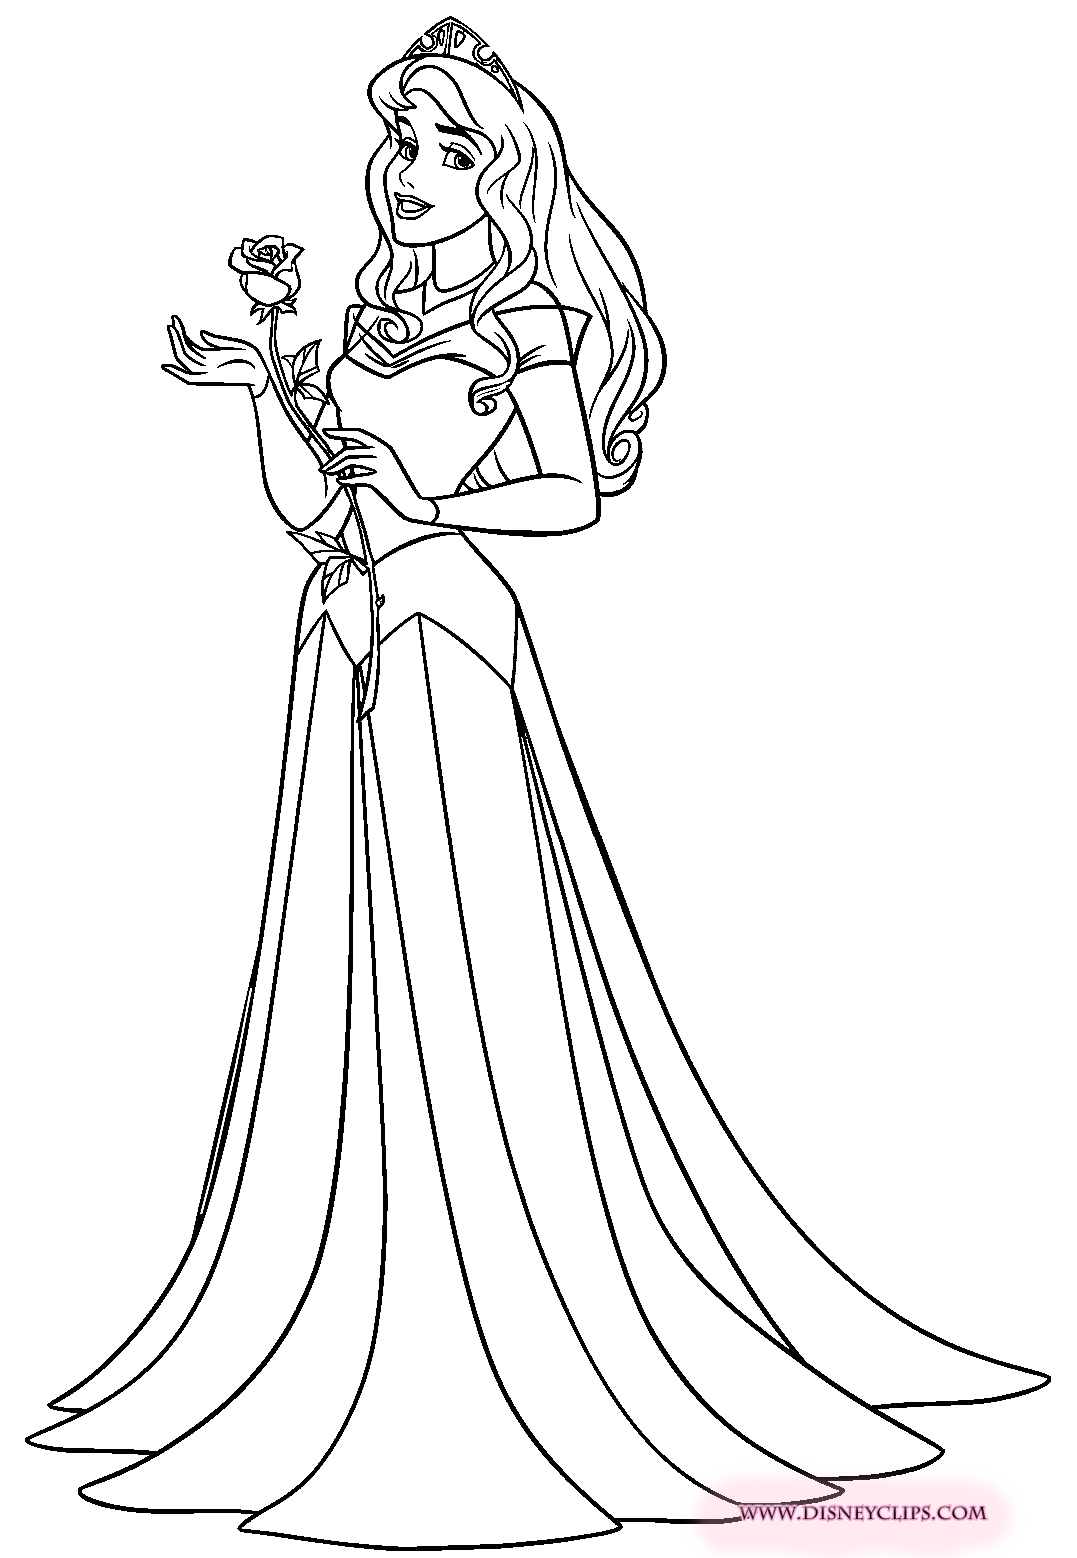 Aurora coloring pages to download and print for free